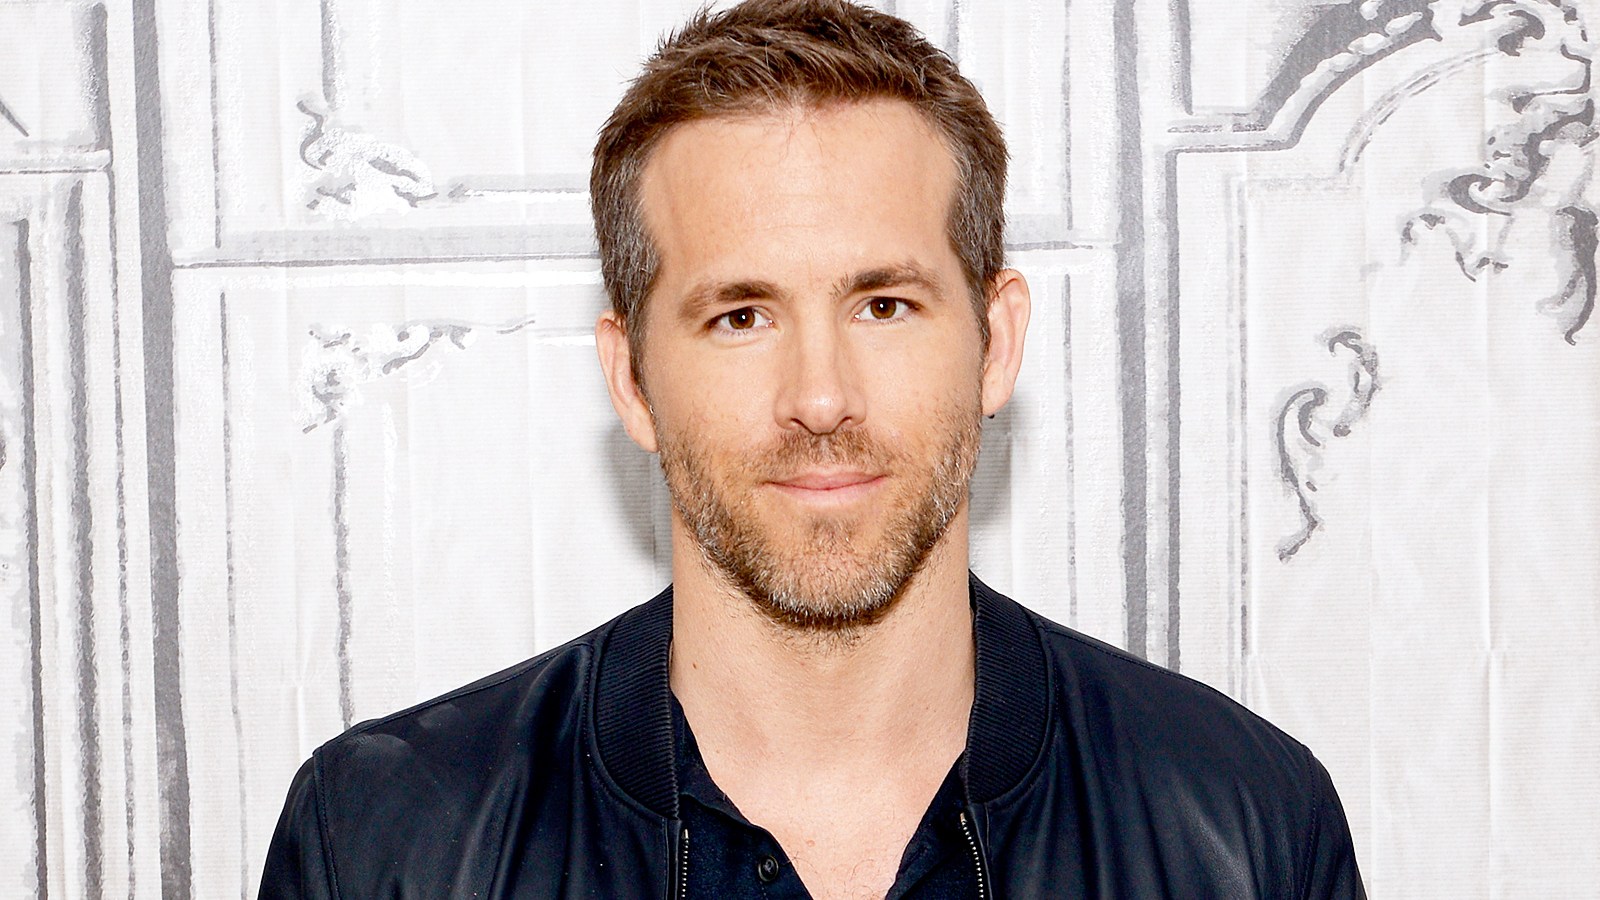 Ryan Reynolds Developing ‘Clue’ Movie Based on the Board Game